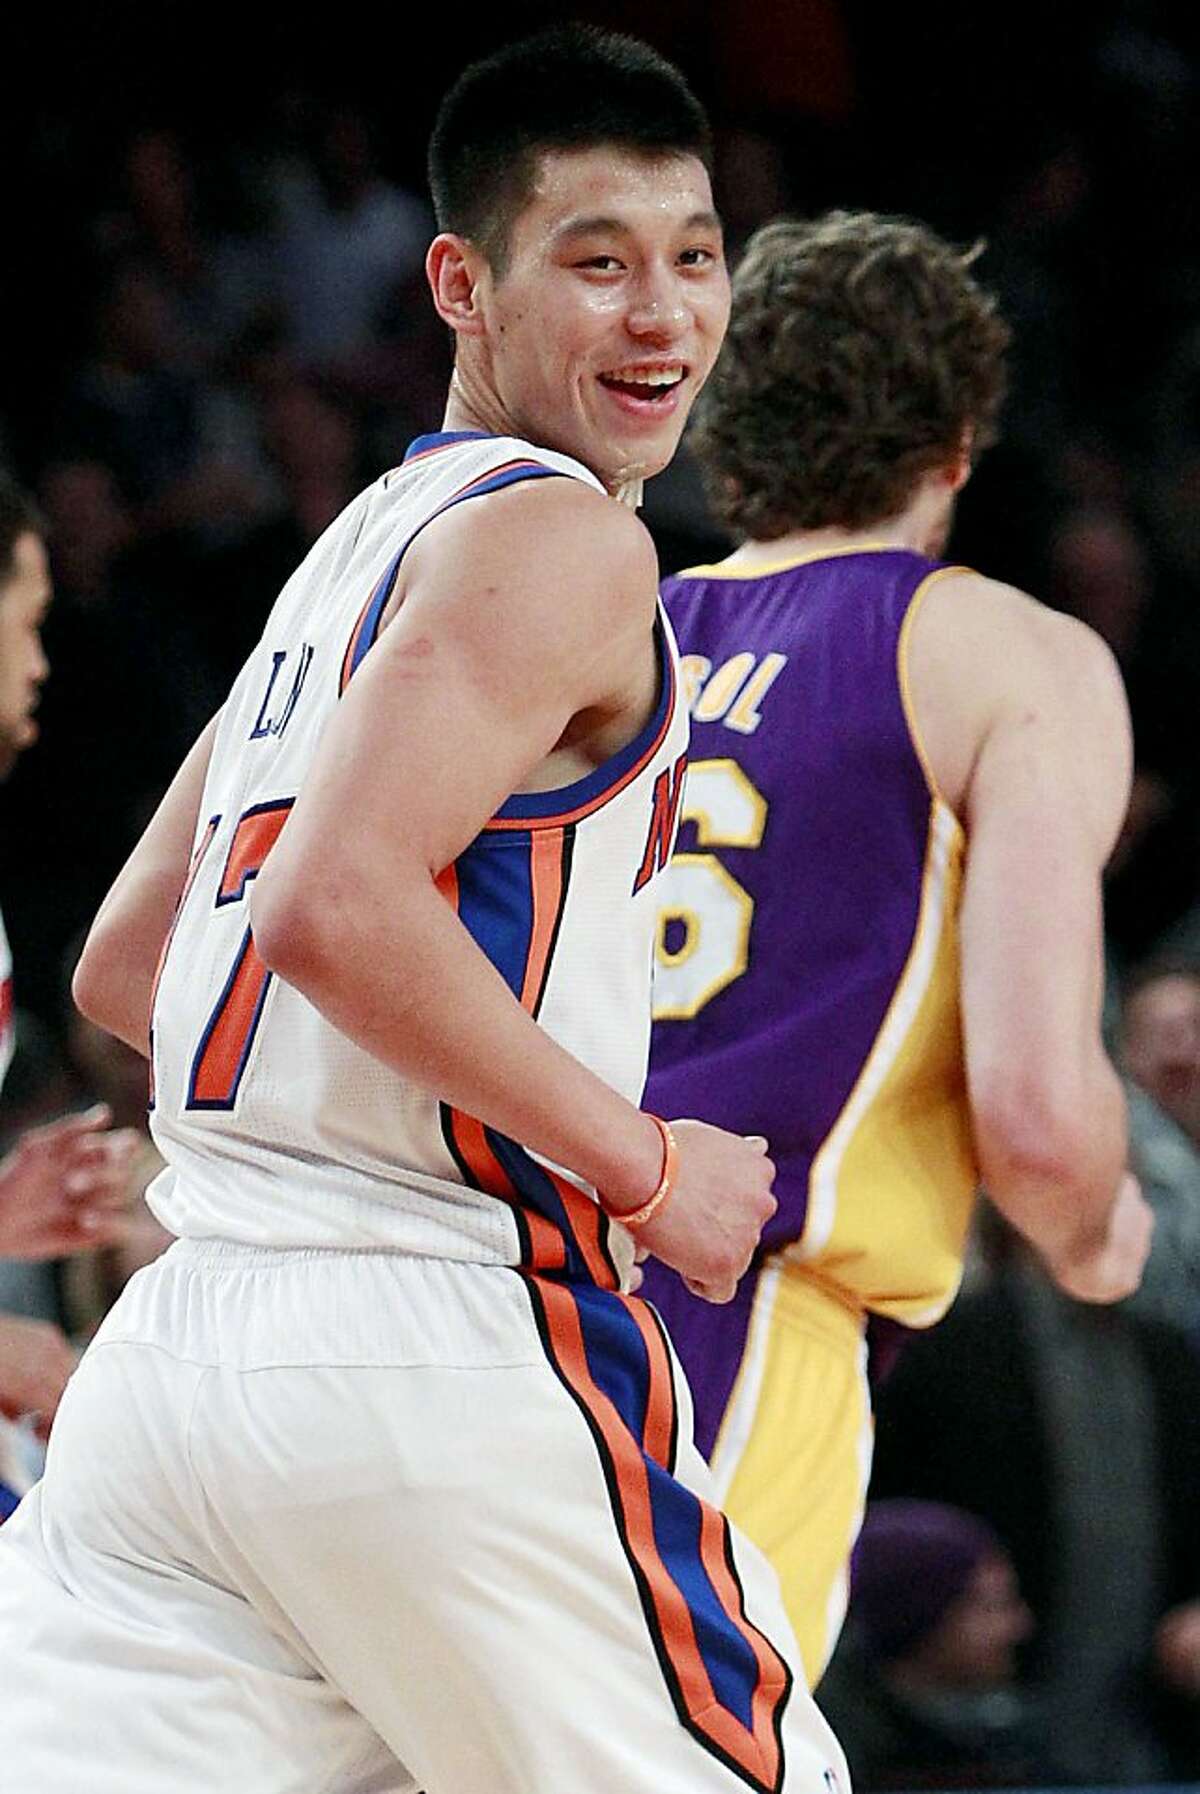 New York Knicks' Jeremy Lin reacts after scoring during the first half of an NBA basketball game against the Los Angeles Lakers, Friday, Feb. 10, 2012, in New York.